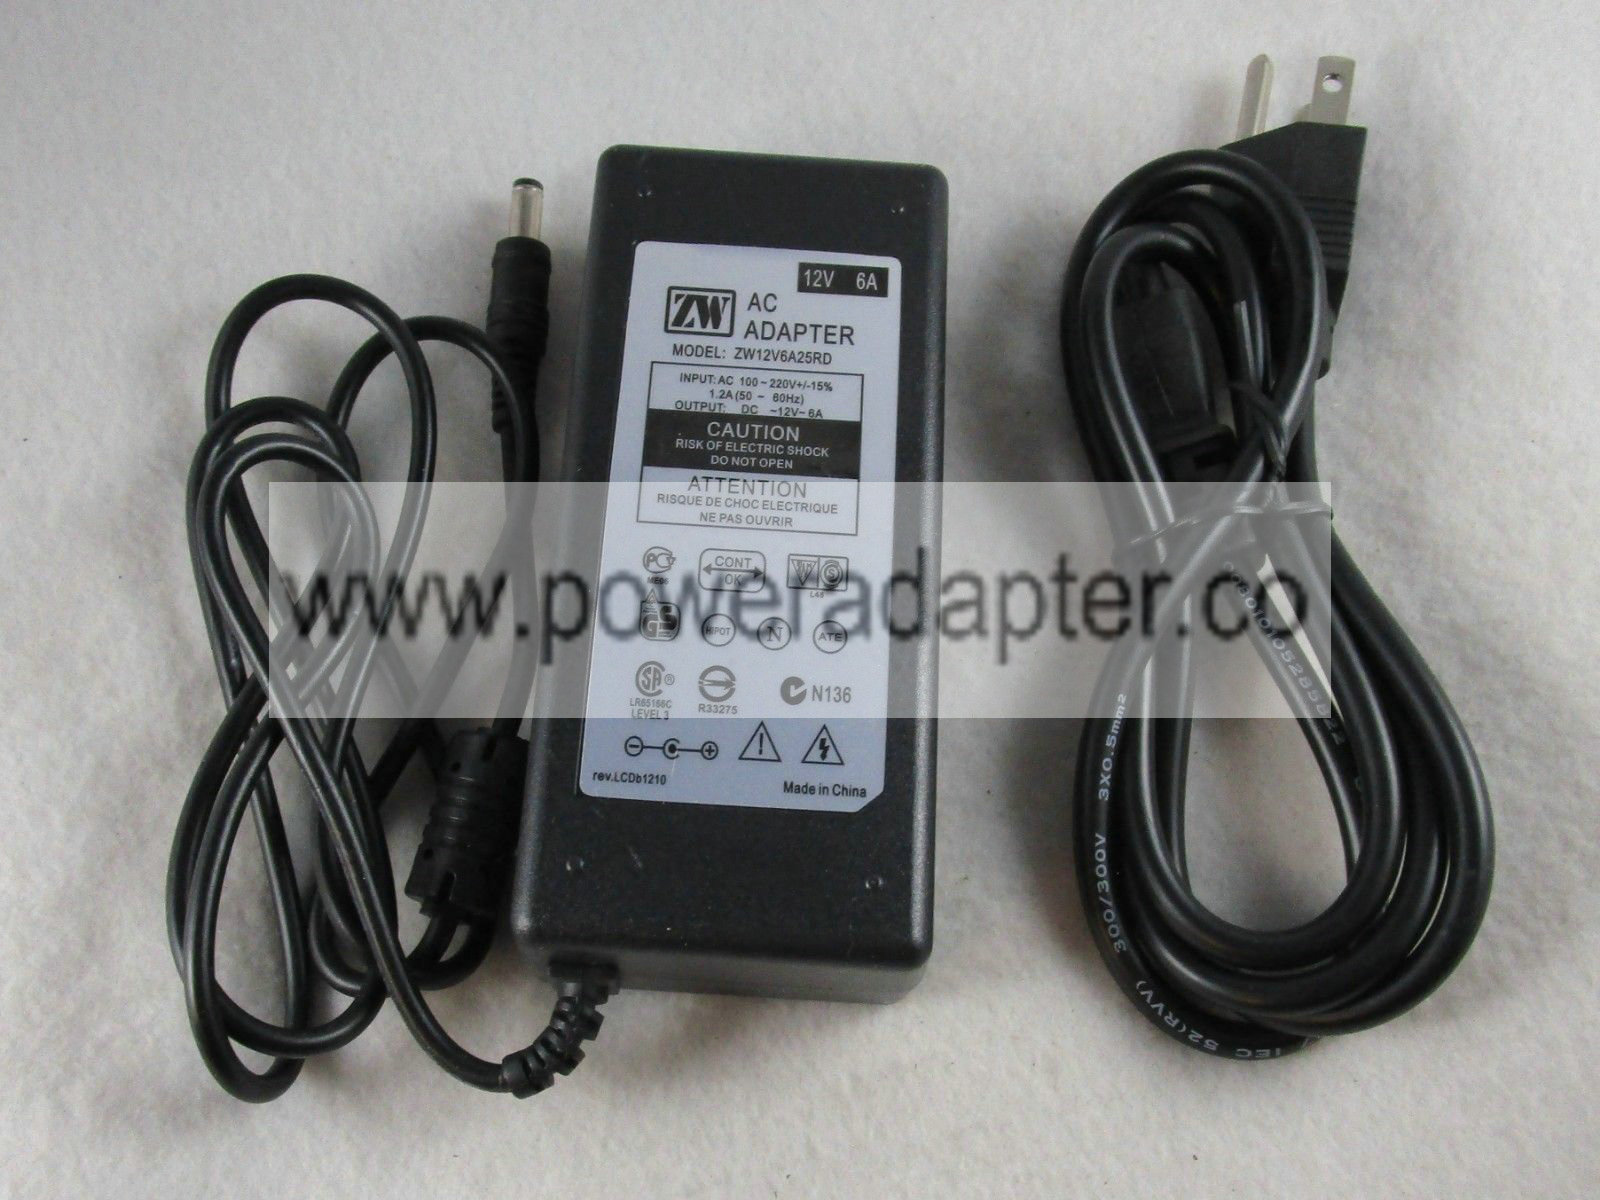 ZW 72W AC Power Adapter New in bulk packaging. Includes 3 prong power cord. Make offer is for qty 5 or more adapters. - Click Image to Close